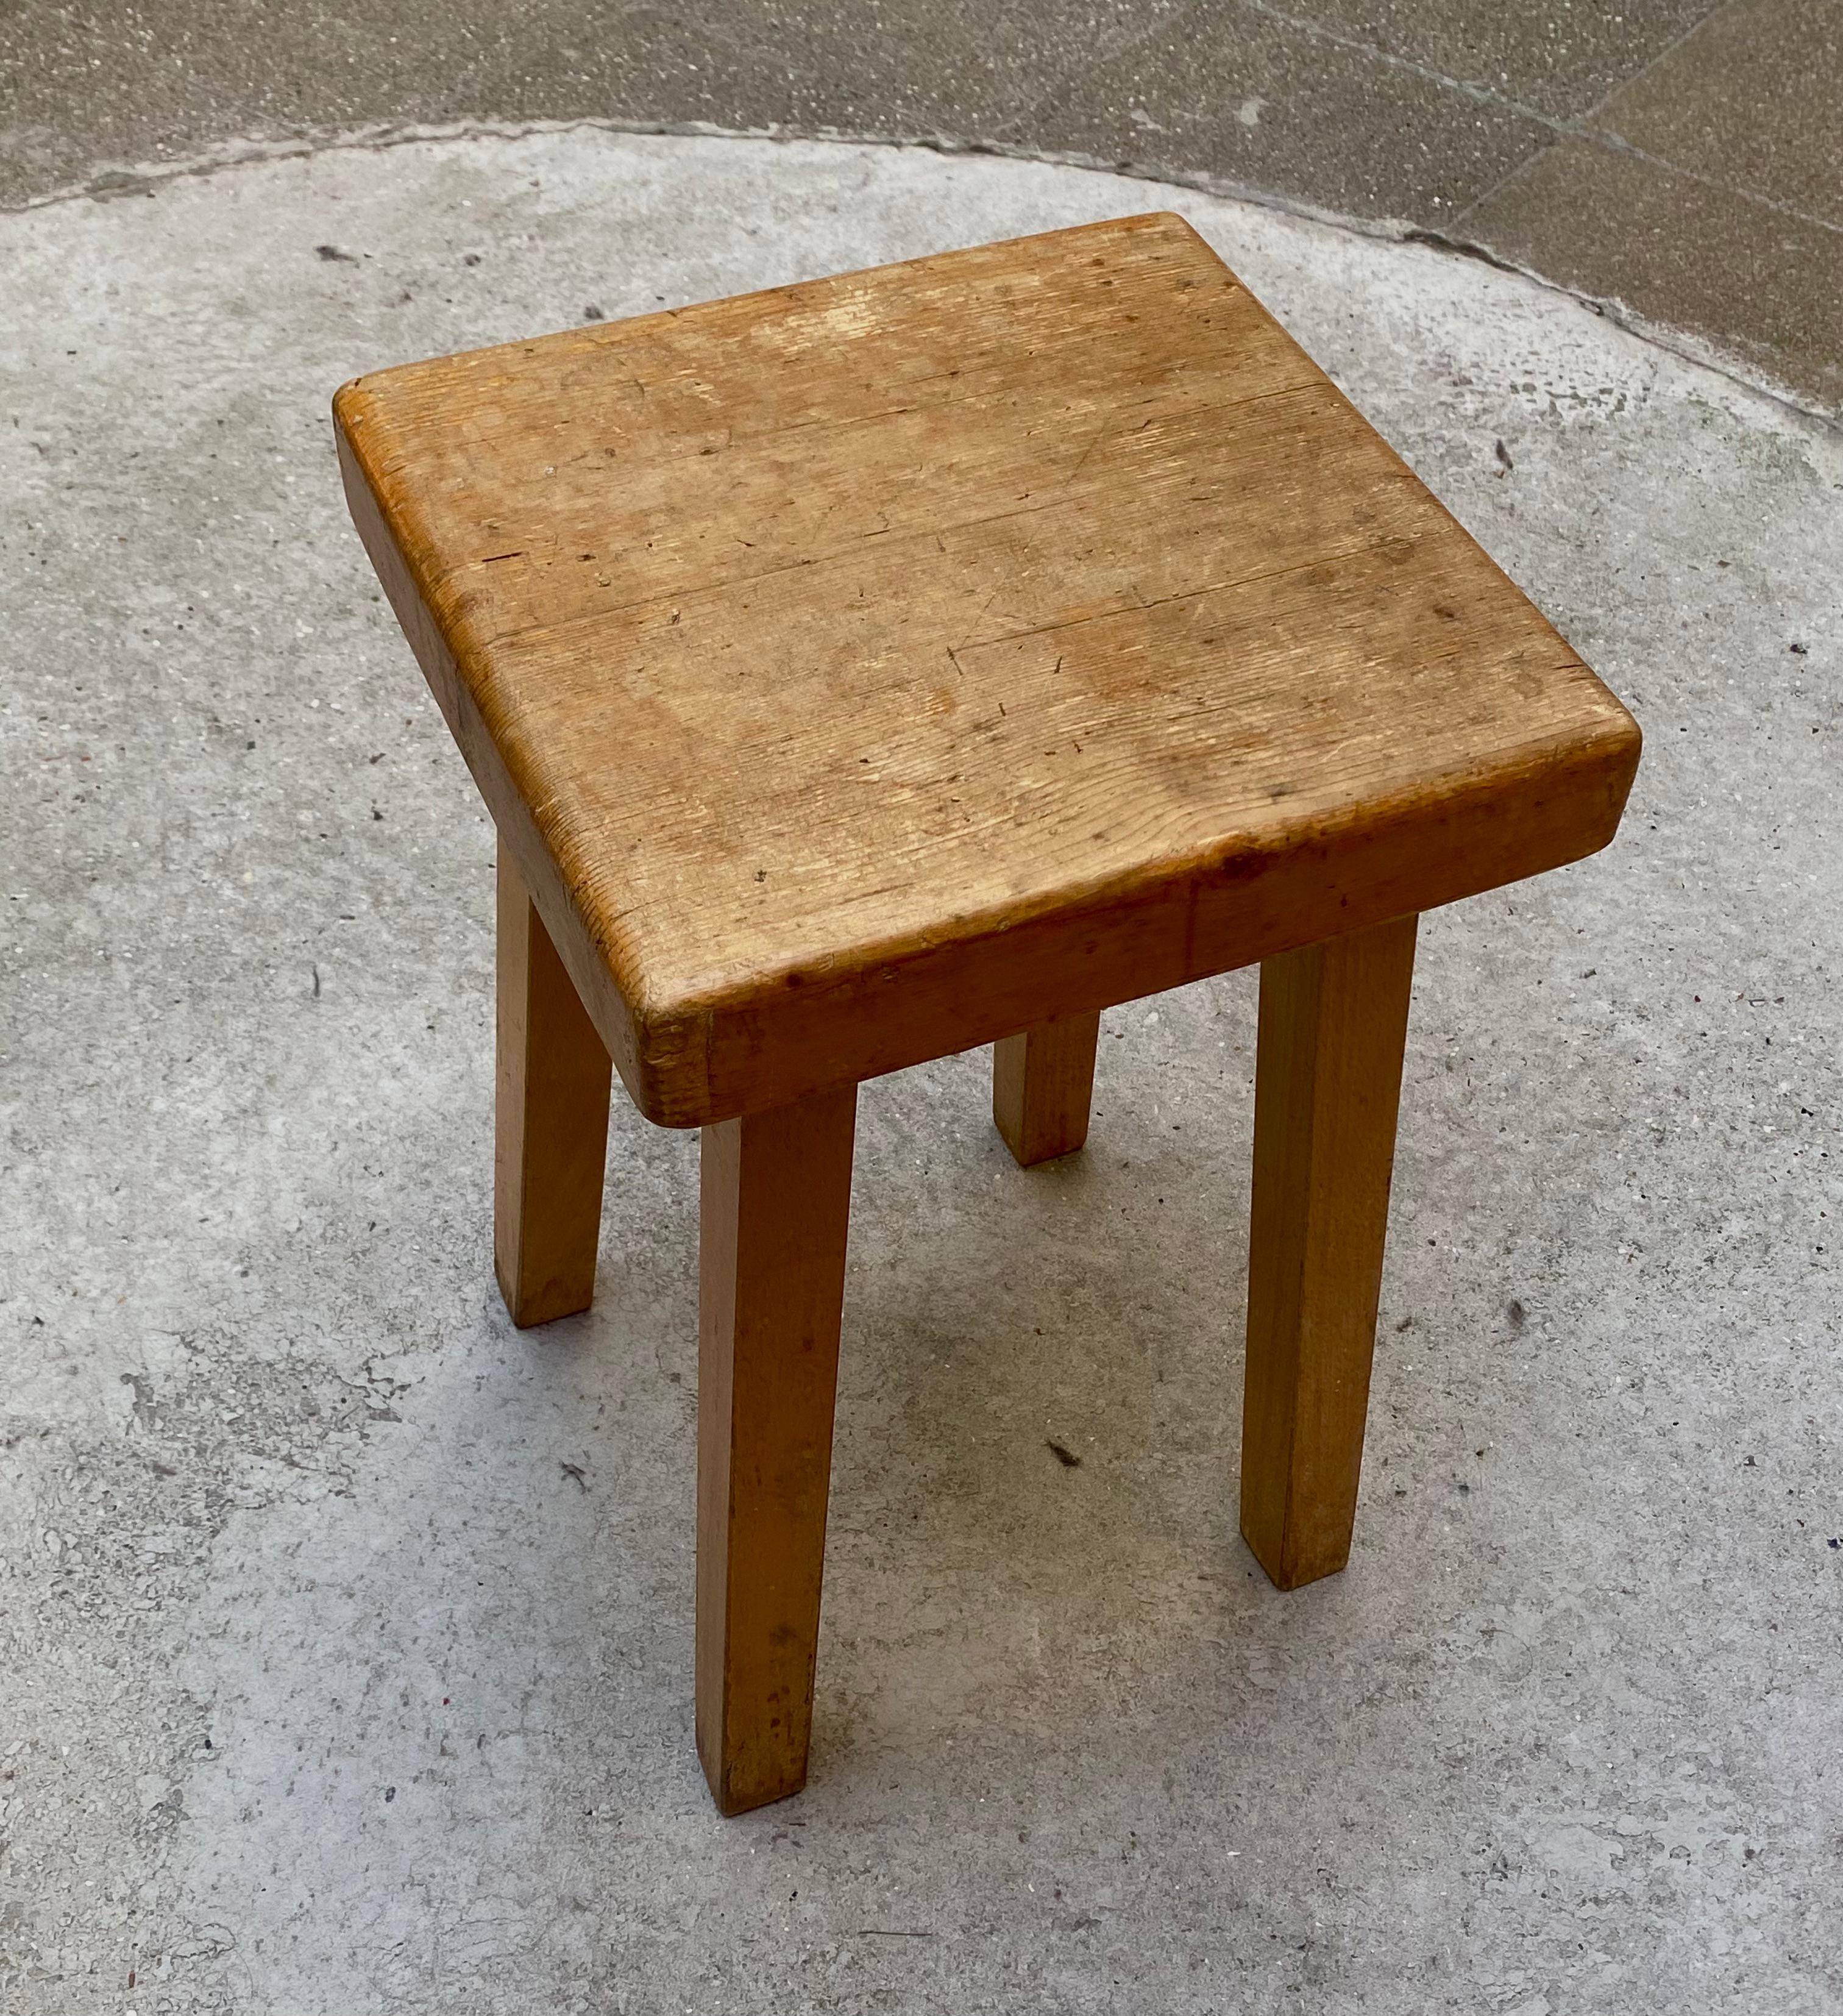 Perriand stool 
Pine wood stool by Charlotte Perriand for Les Arcs 1800. 
Square seat. 
Quadripod base.
Very nice patina.
Provenance: residence l'Aiguille Grive.
1960s. 
Very good condition.
midcentury
dimensions: 29 x 29 x h 45 cm
price: 1900 €.